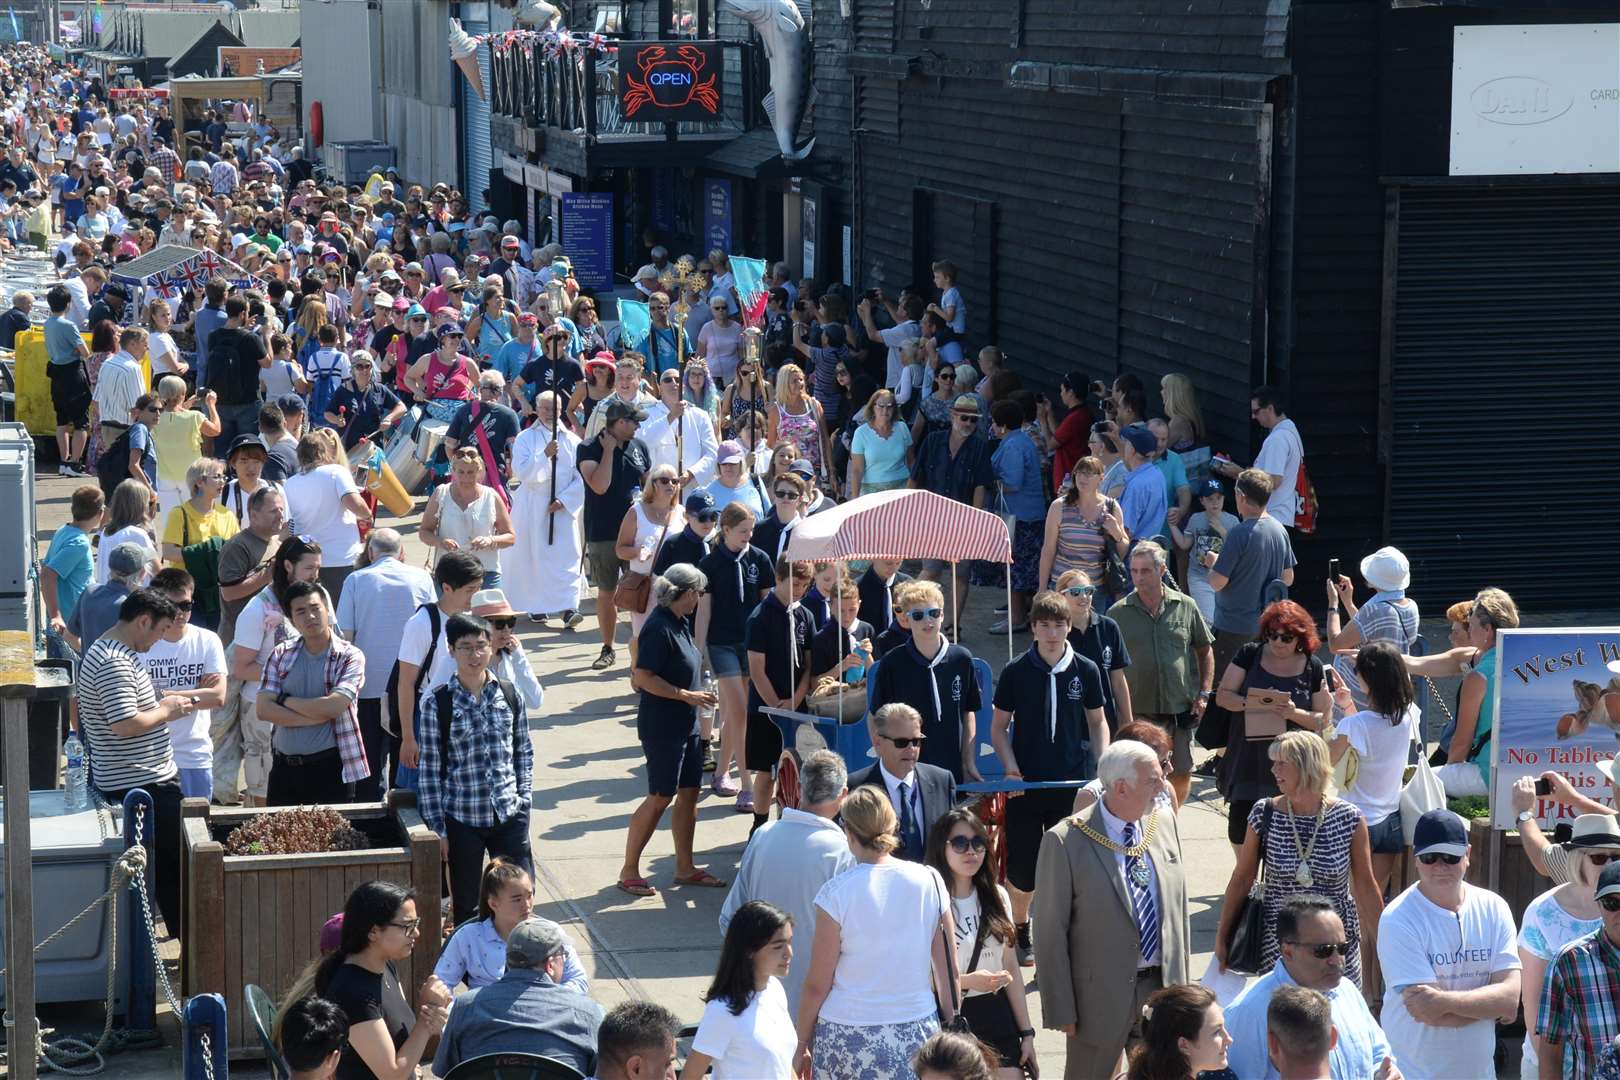 Whitstable Oyster Festival draws huge crowds in heatwave